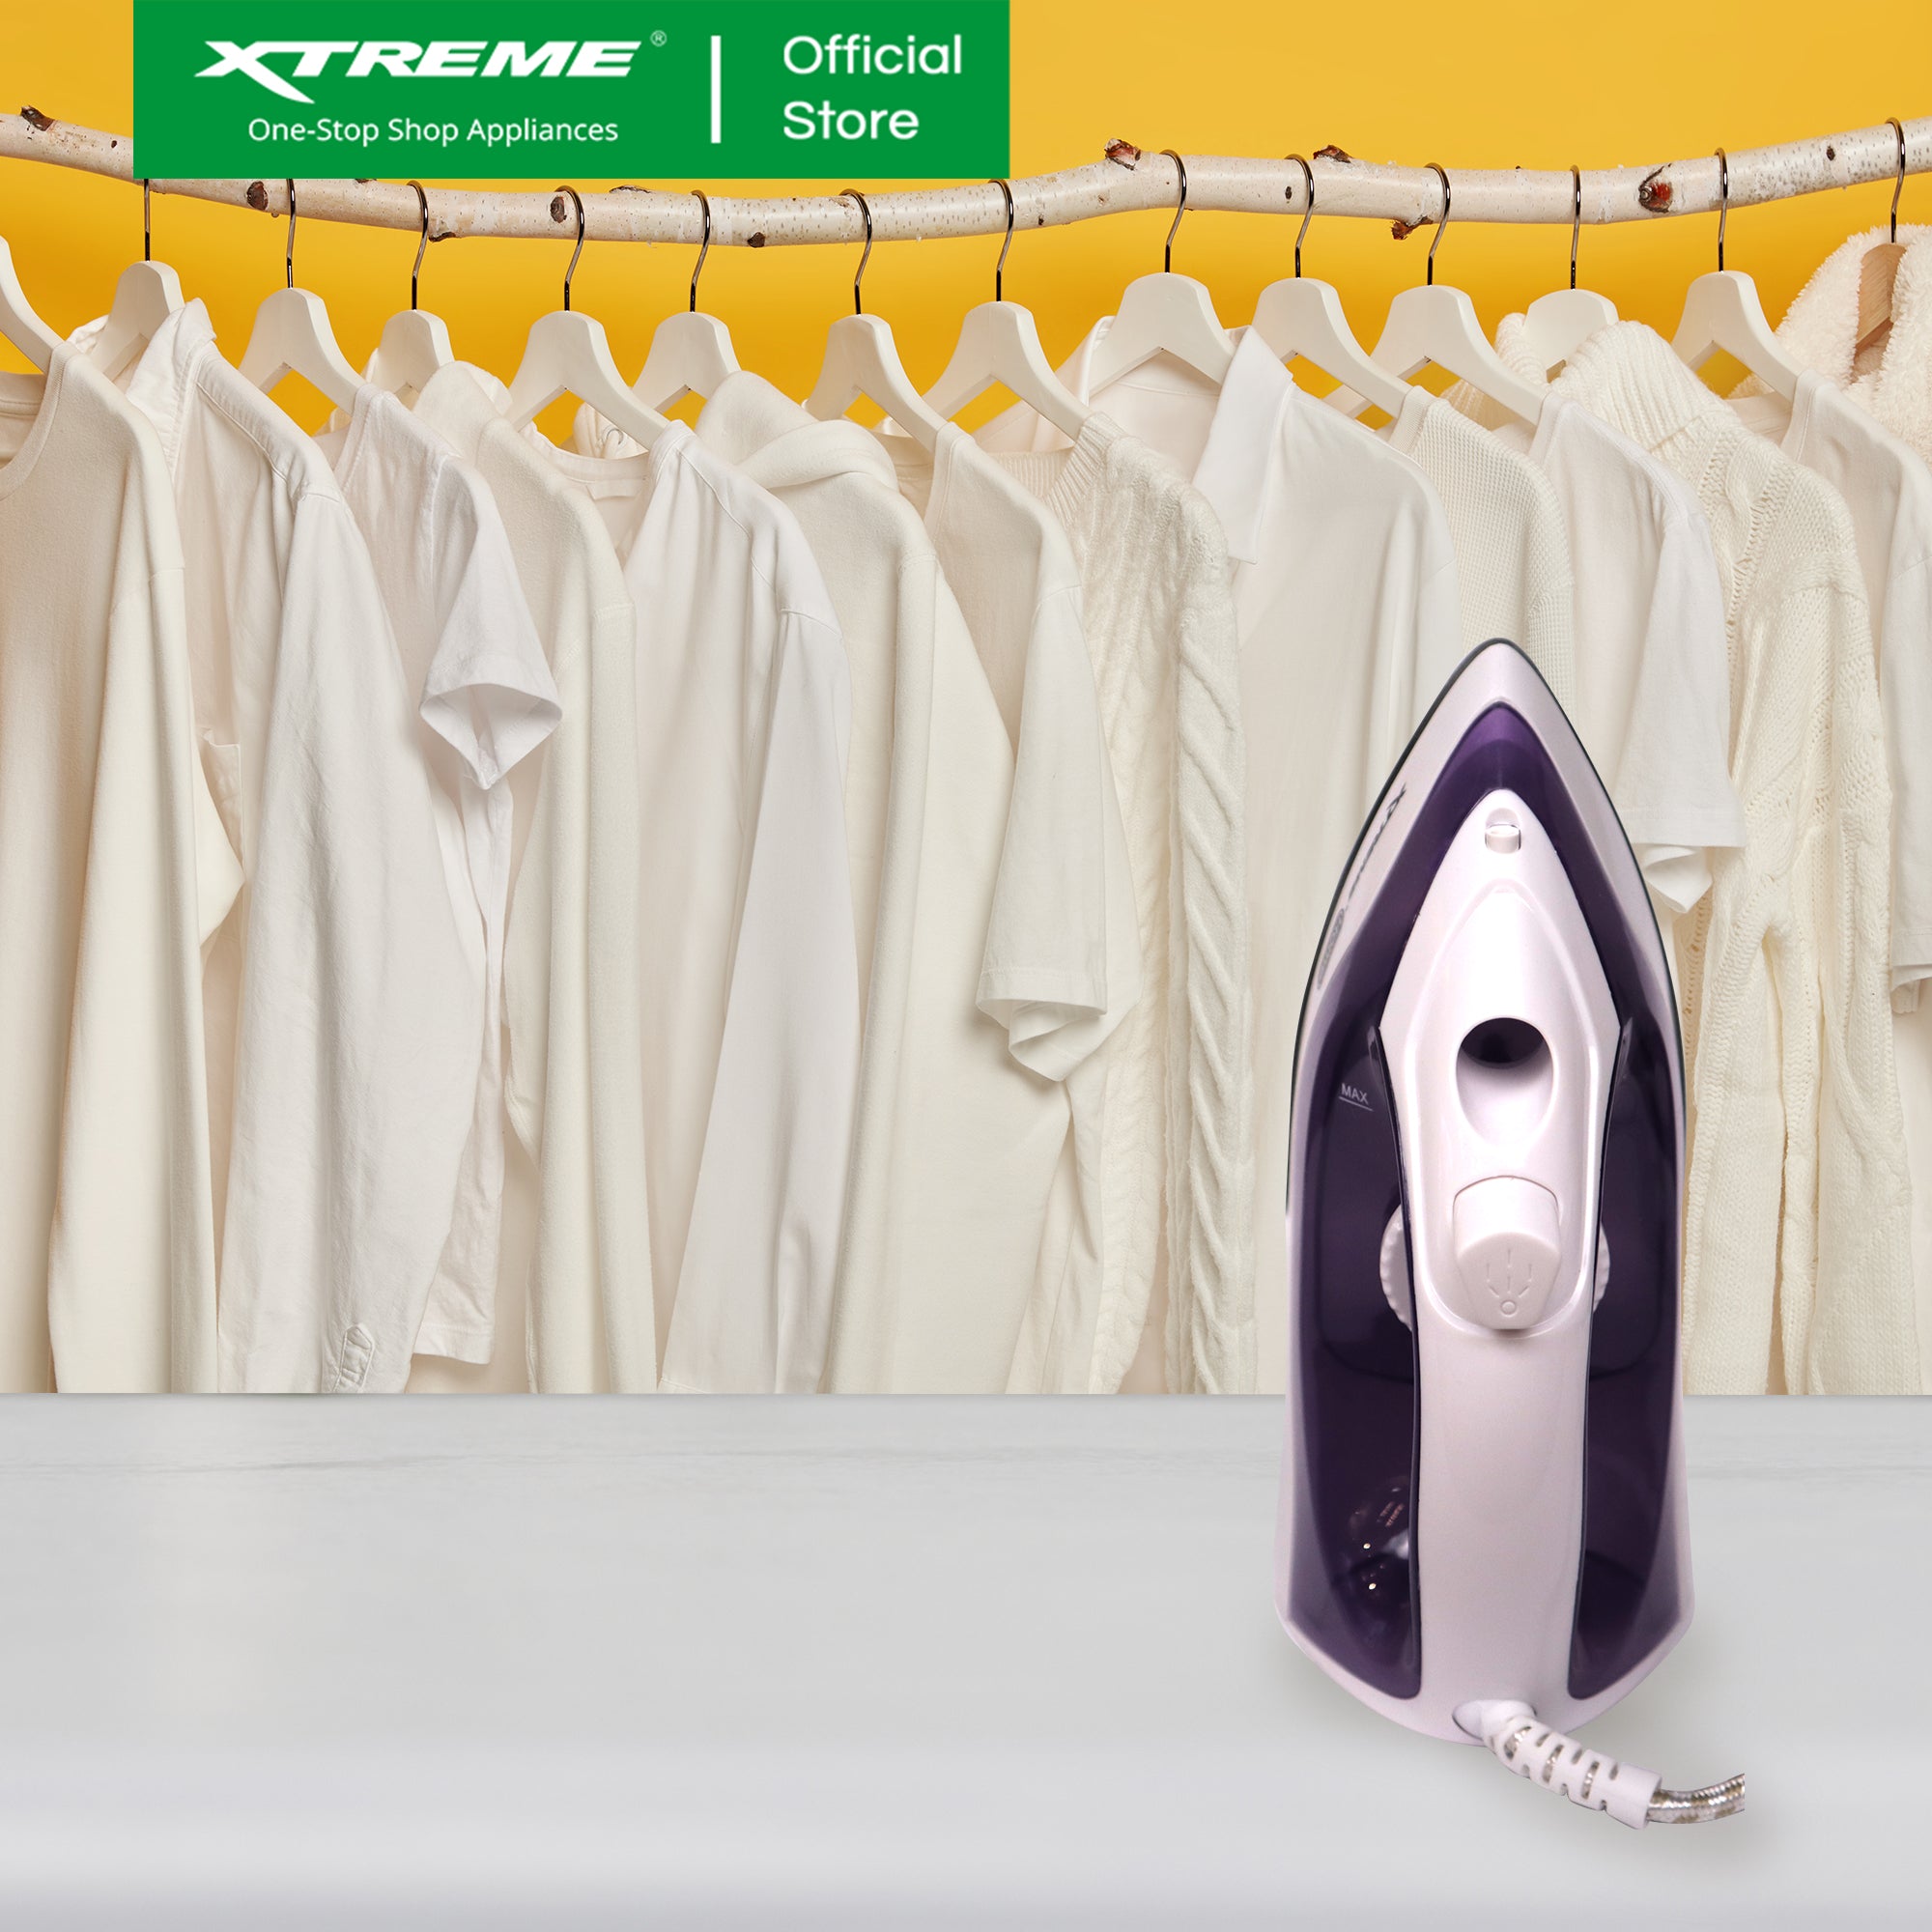 XTREME HOME Dry Iron with Spray (Violet) | XH-IRONSPRAYVIOLET